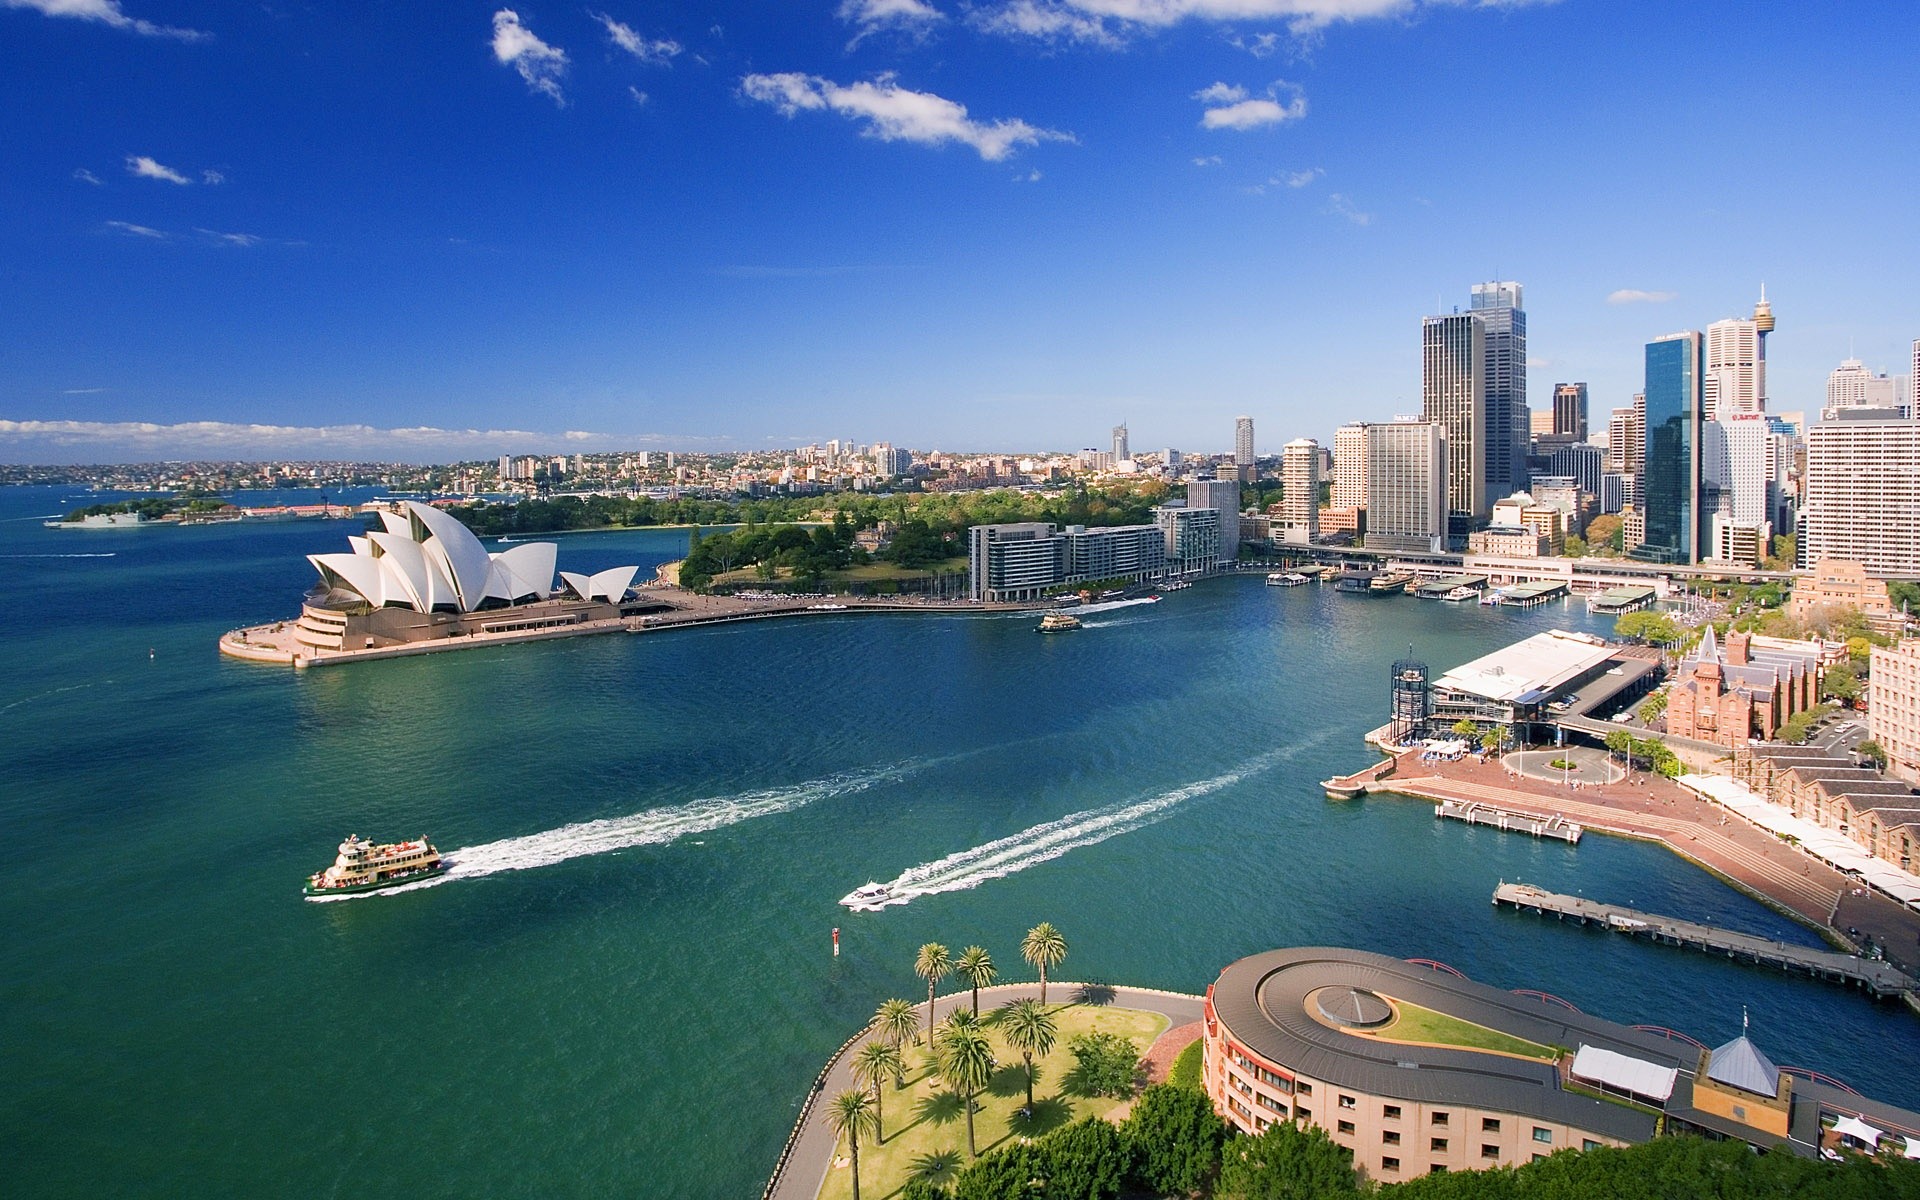 Rachel Hussey from Elizabeth Norman International looks at why people are emigrating to Australia for work featured image